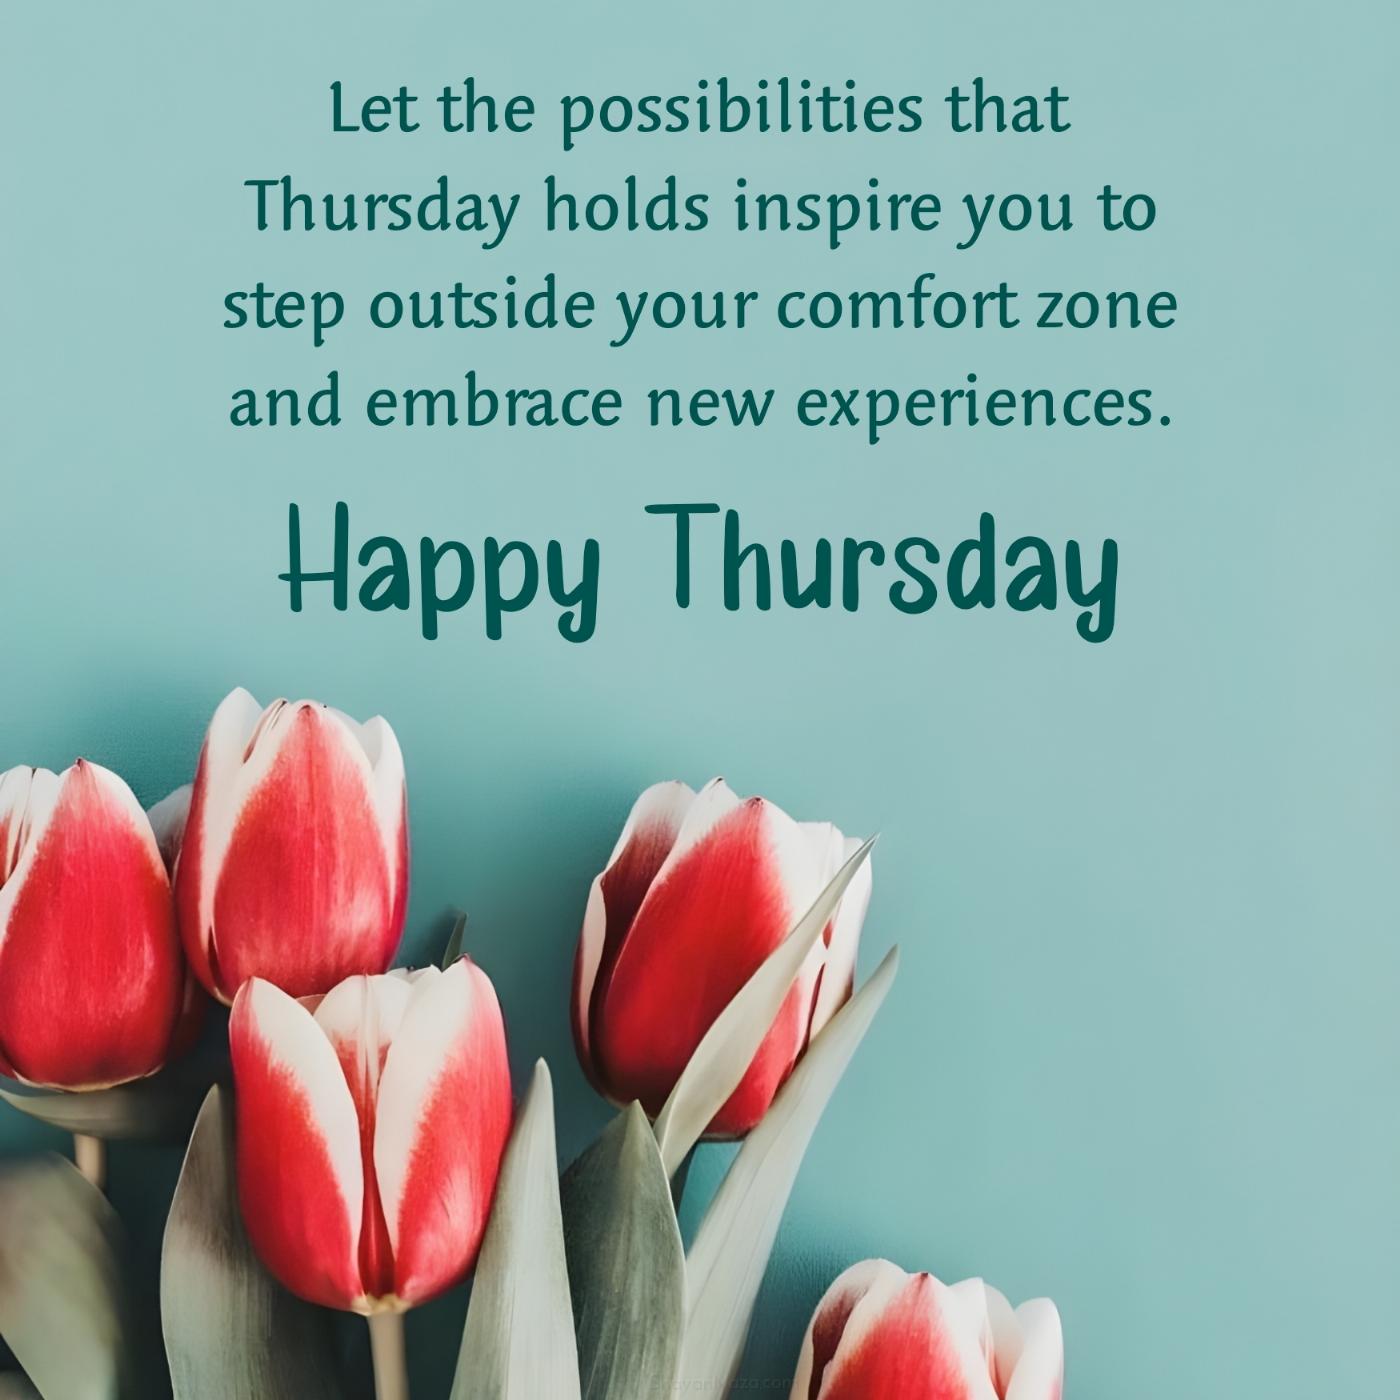 Let the possibilities that Thursday holds inspire you to step outside